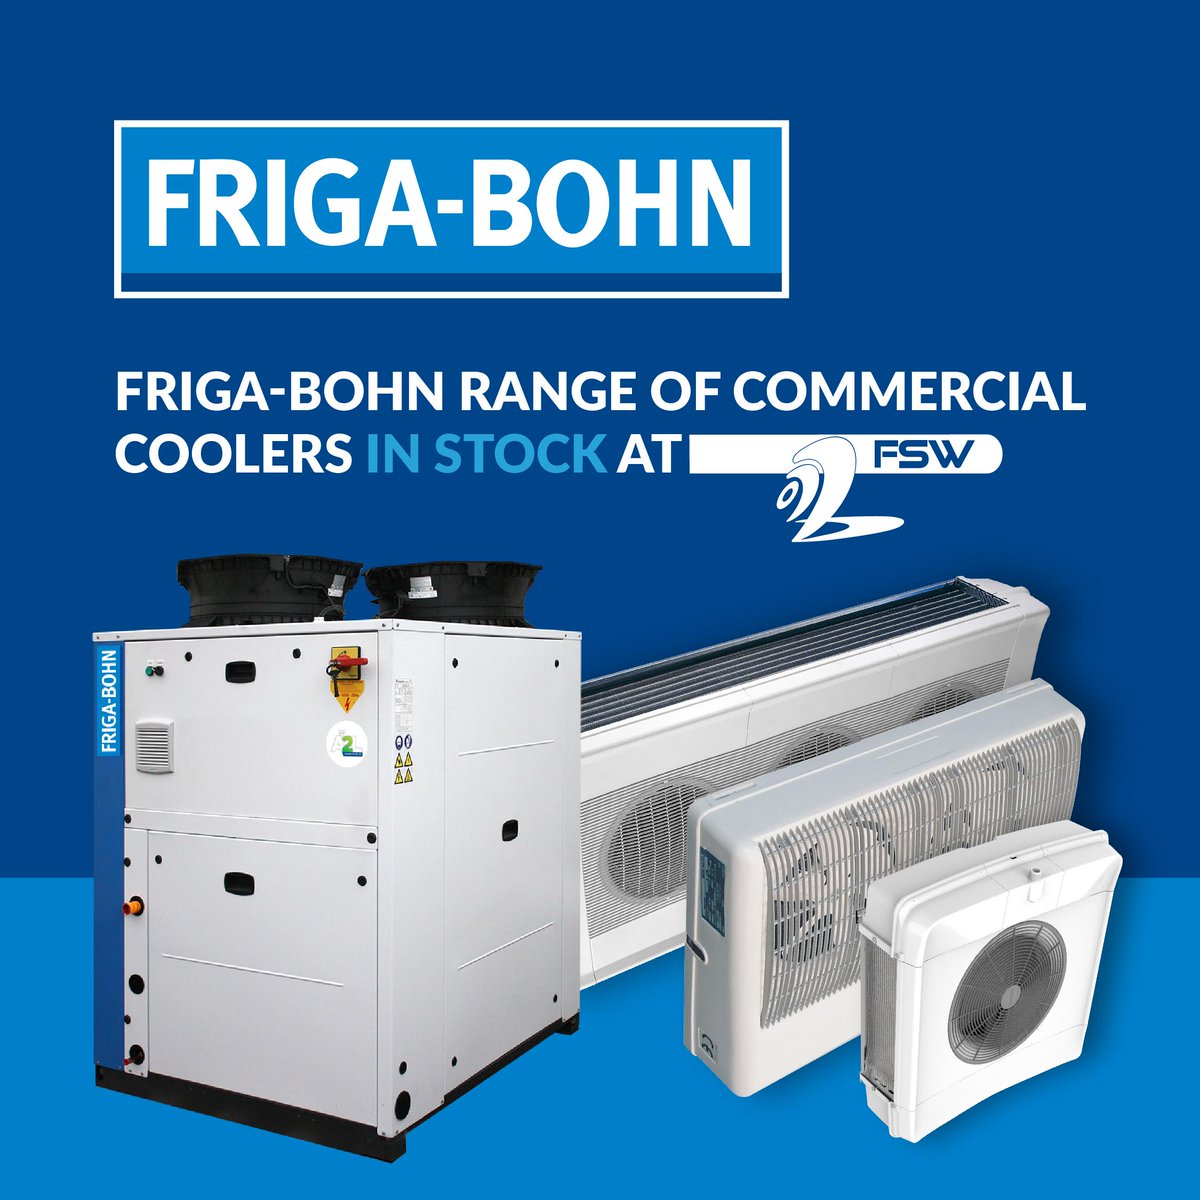 Do you have a commercial cooling project coming up this year? Contact Fridge Spares Wholesale for all your Friga-Bohn needs! ❄️❄️❄️

sales@fridgespares.ie | 00353 1 830 3466
#HVACR #CommercialCooling #HVACR